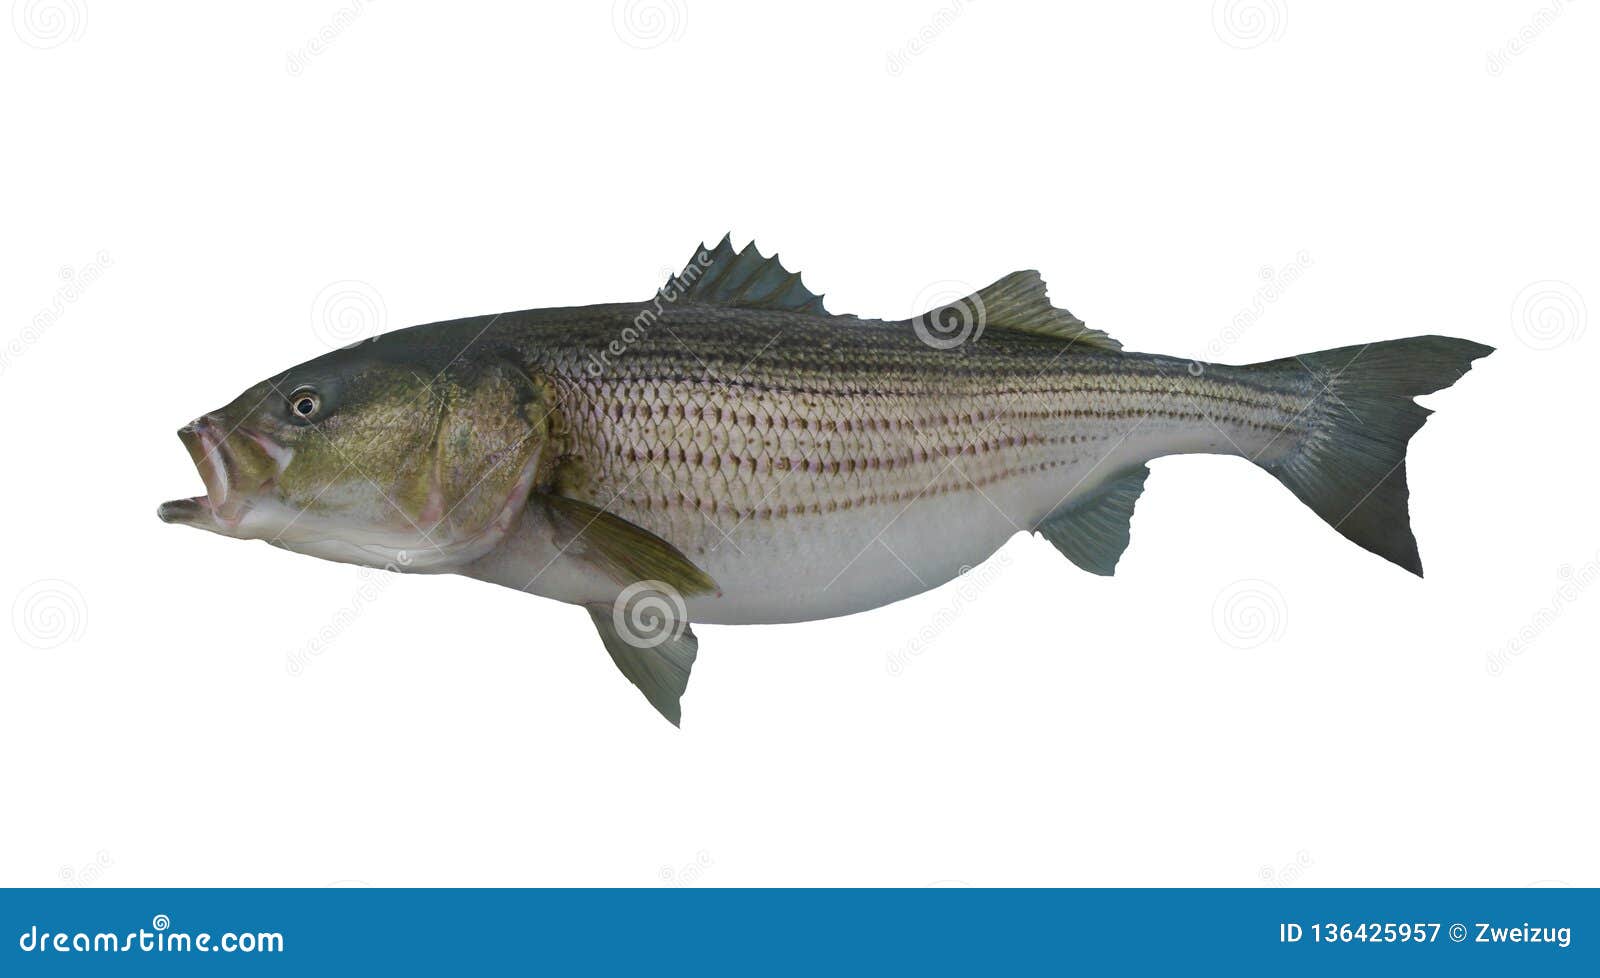 Large Striped Bass Striper Fish Isolated on White Background Stock Image -  Image of zander, saltwater: 136425957